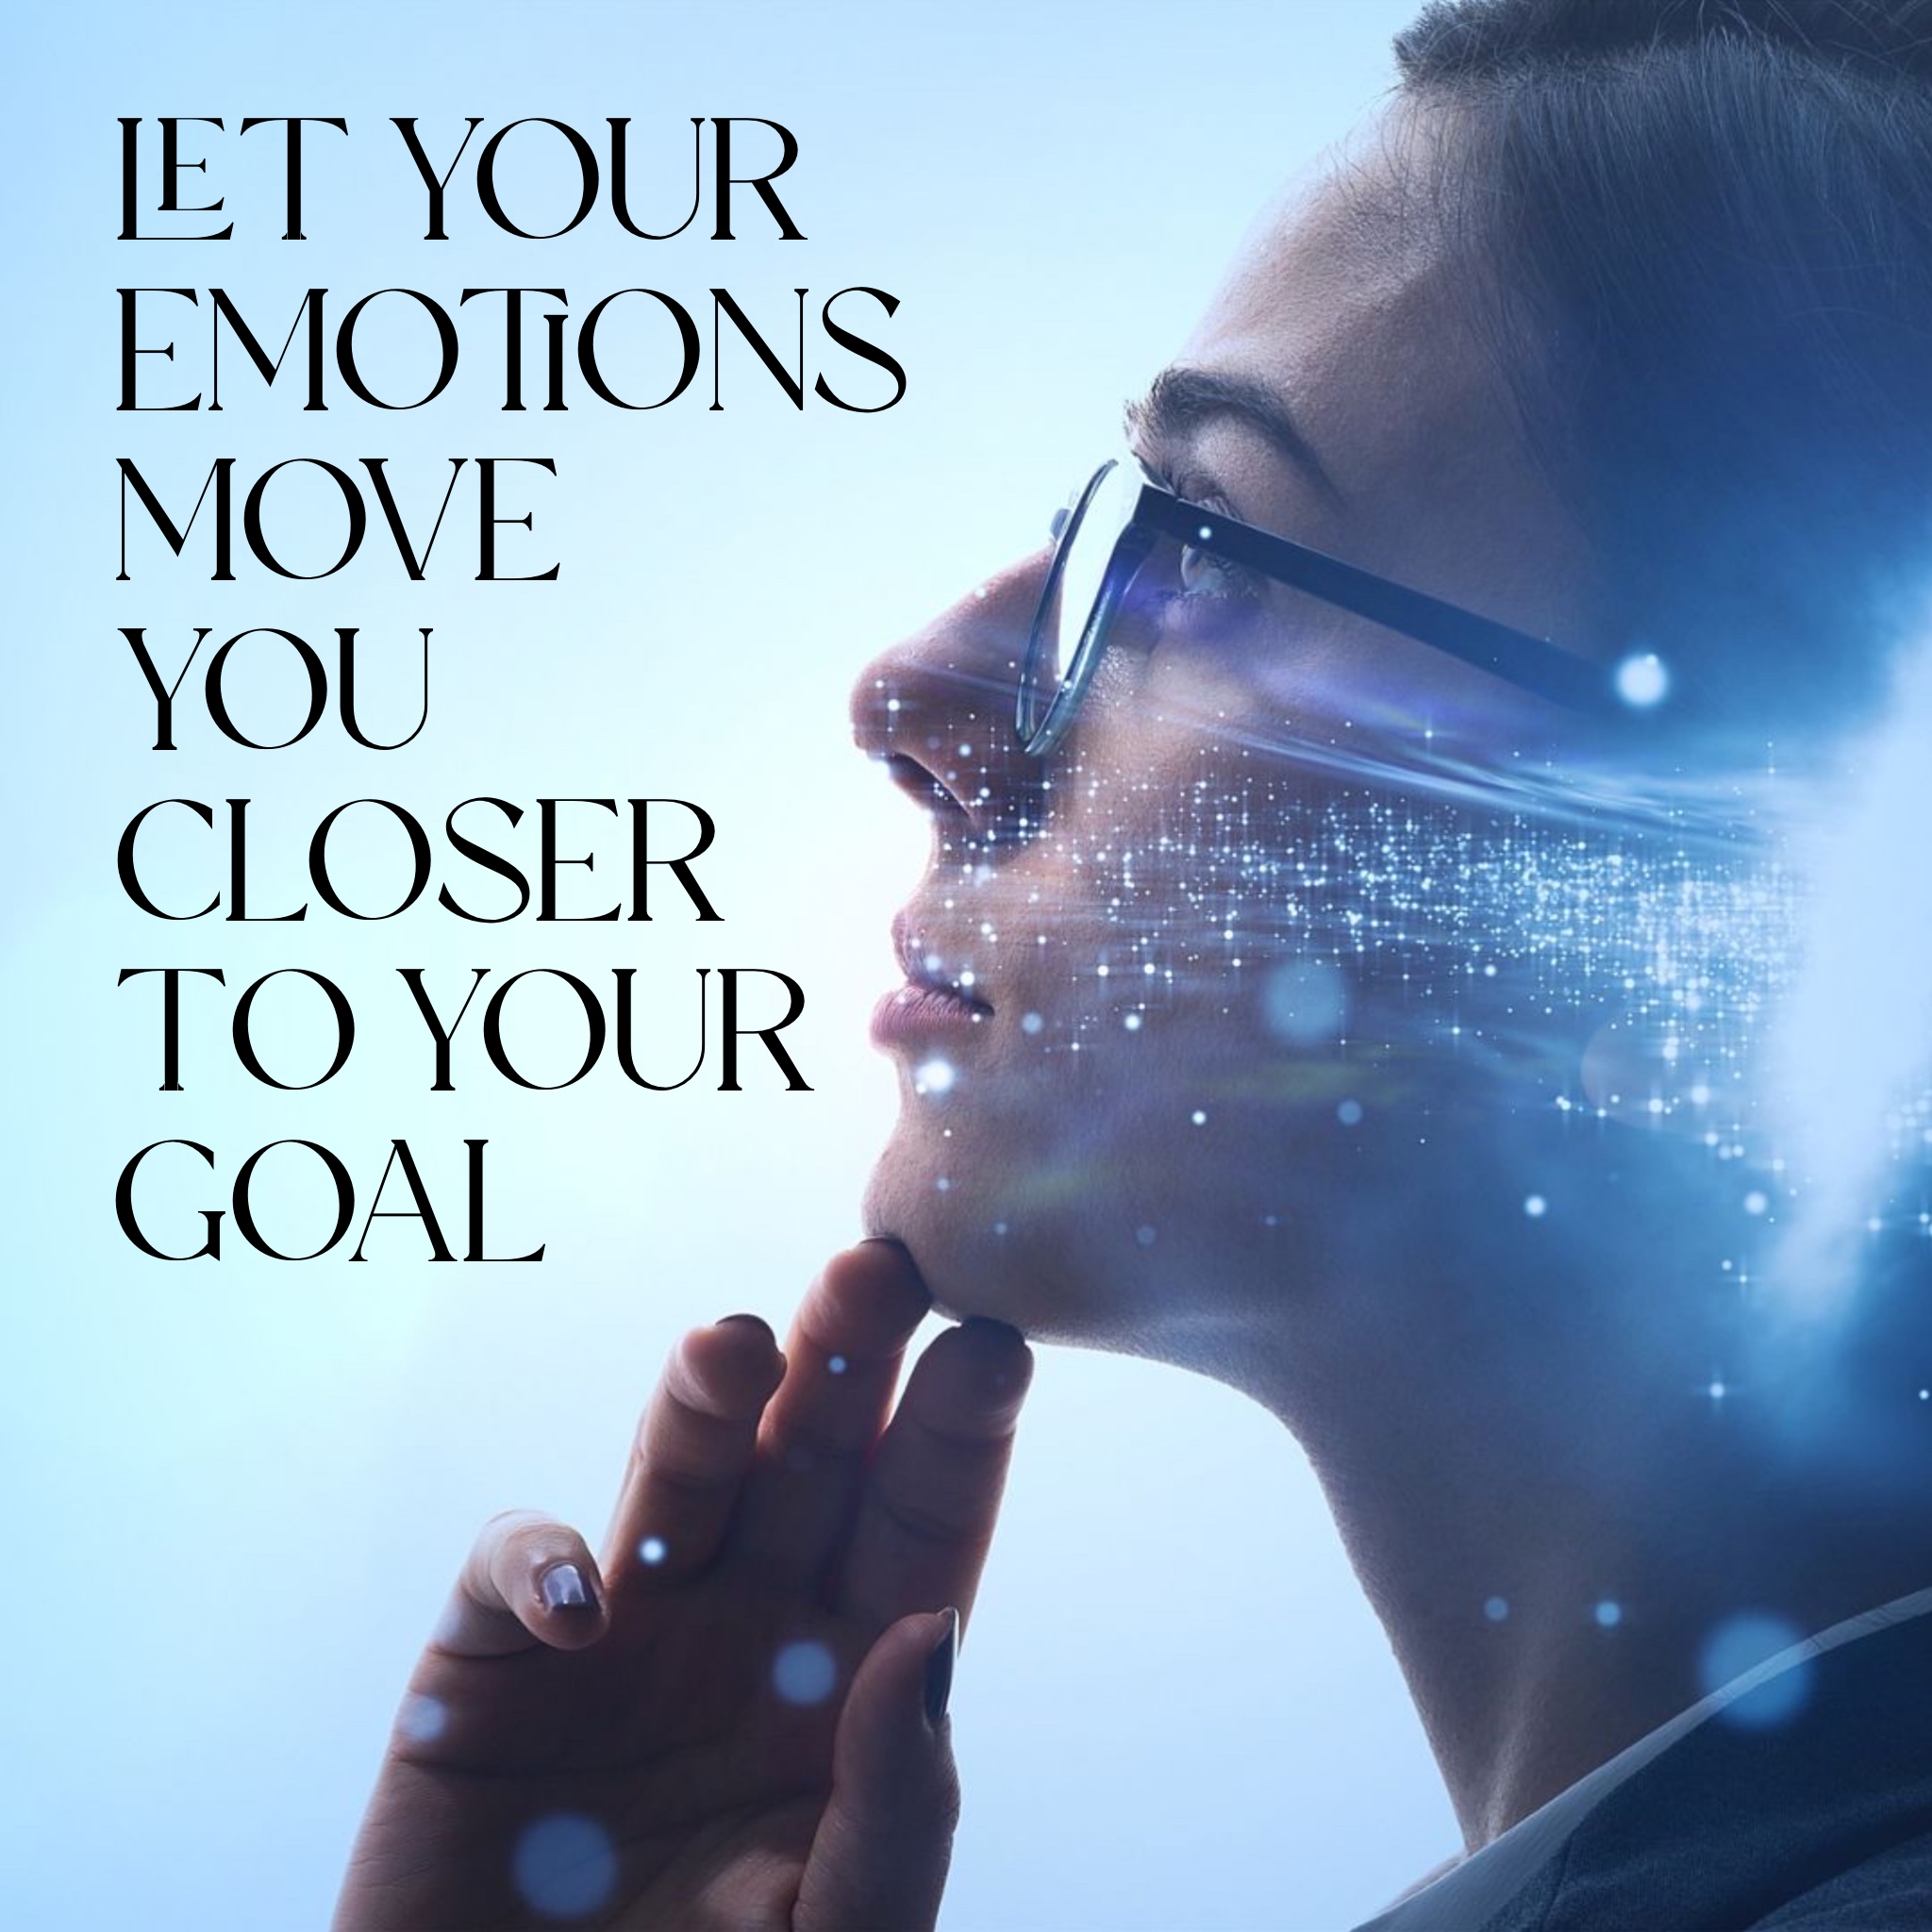 Let your emotions move you closer to your goal.